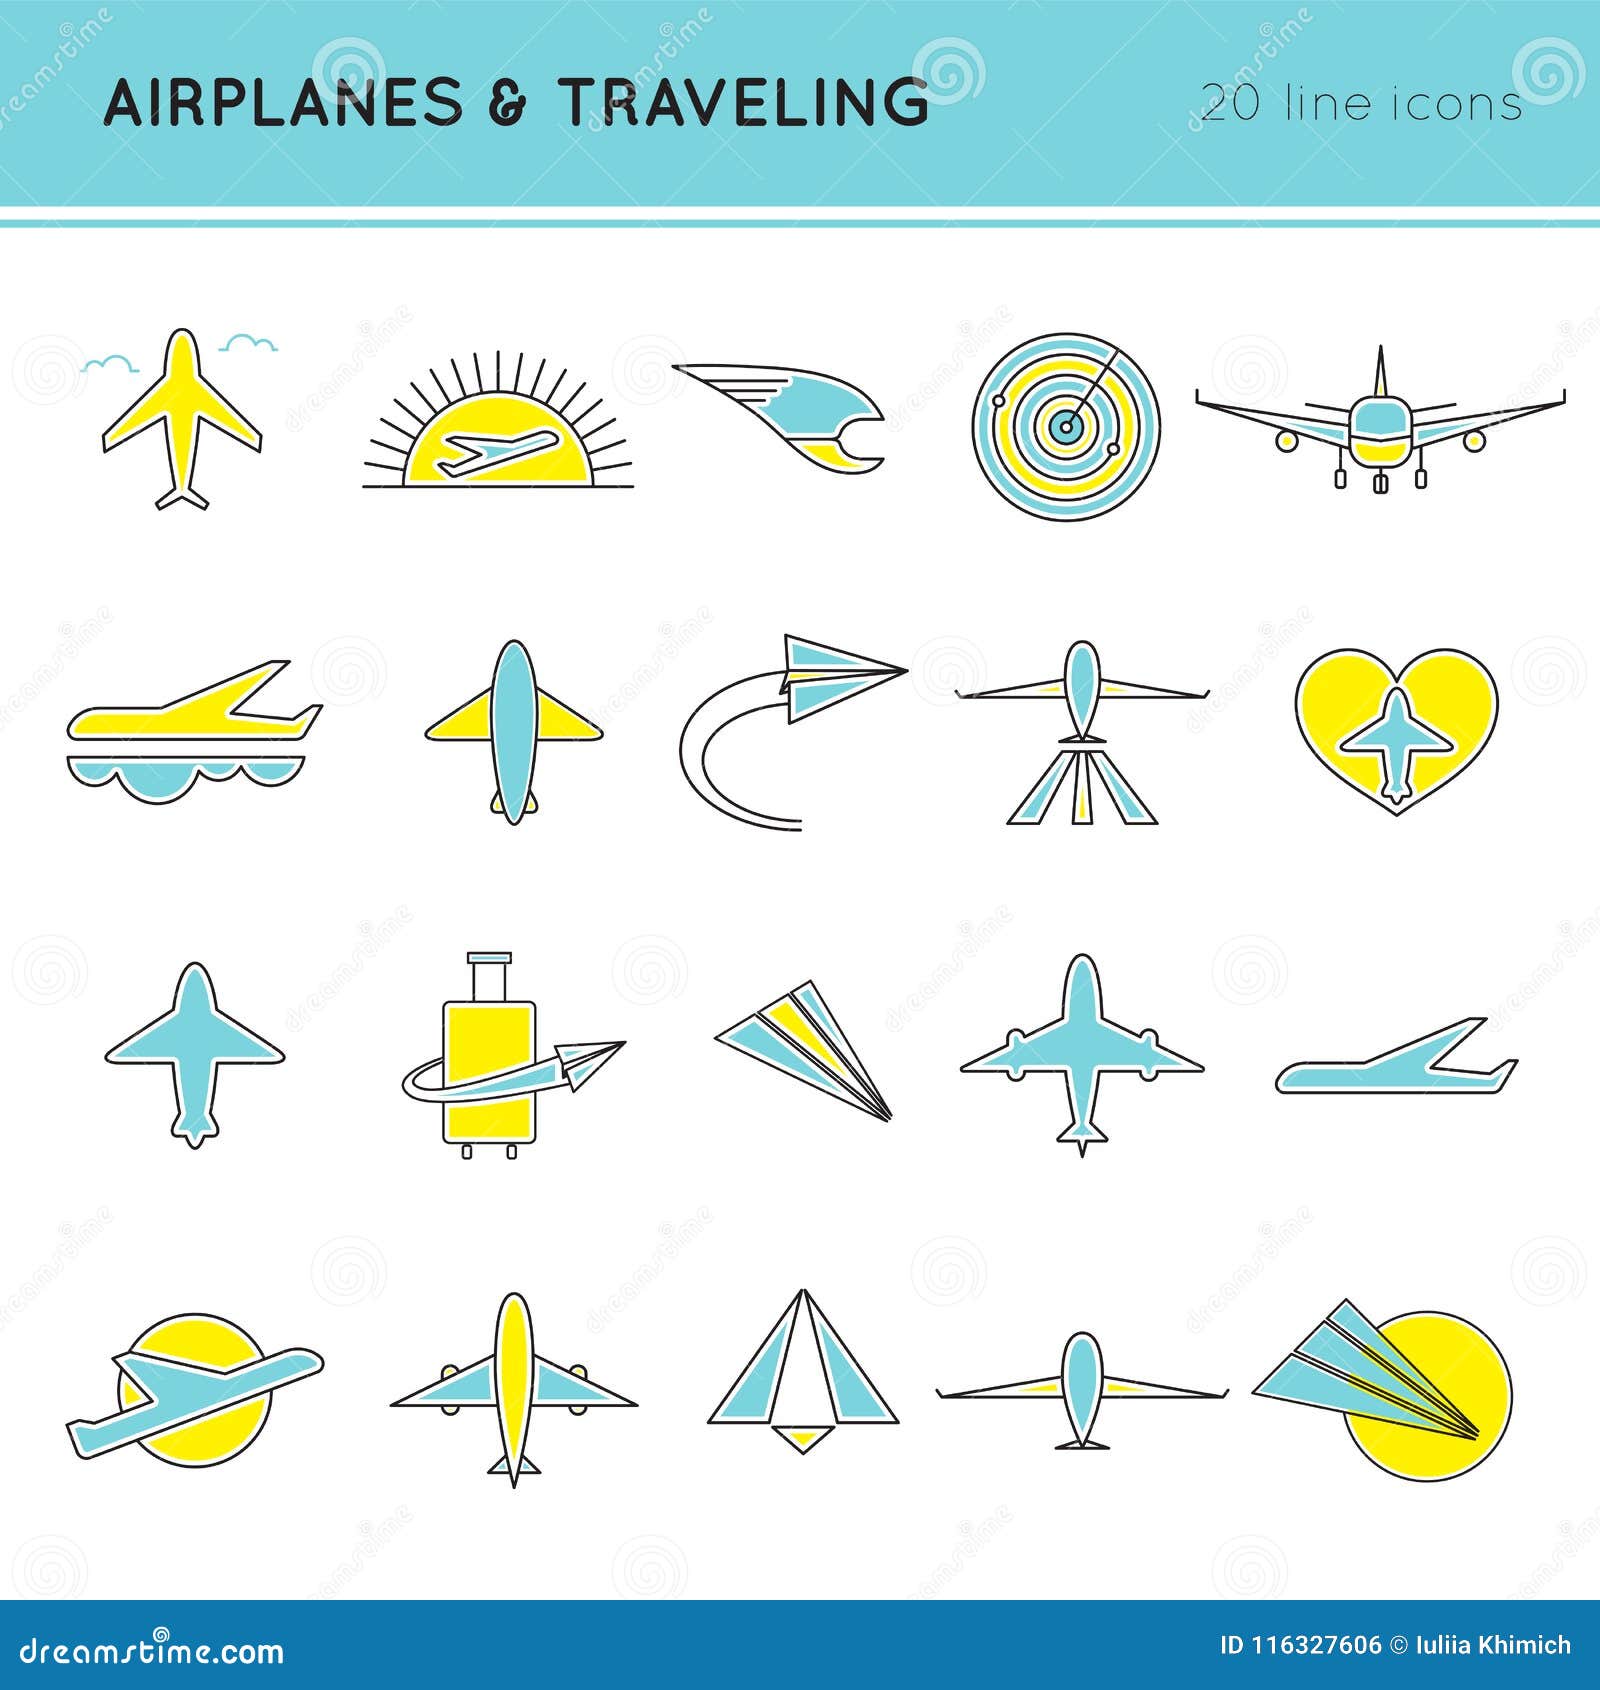 Airlines icon set stock vector. Illustration of object - 116327606